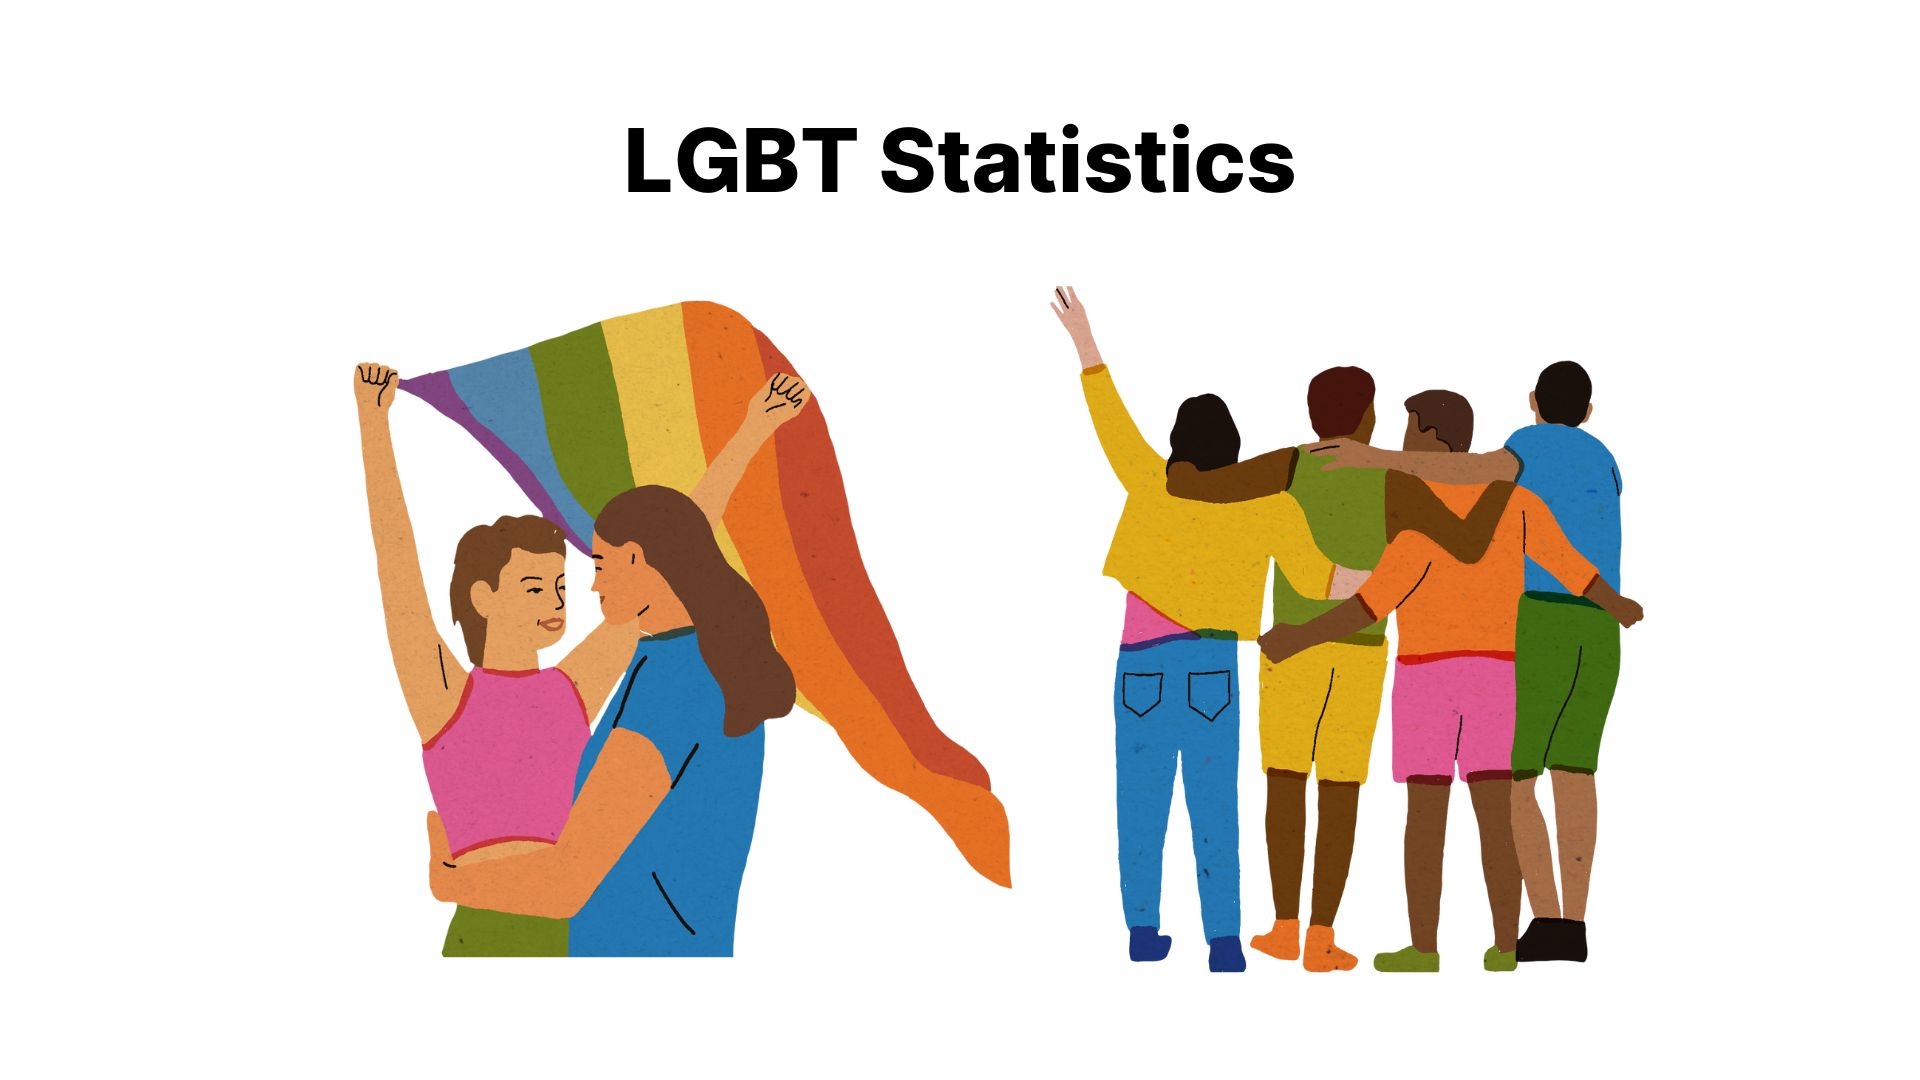 LGBT Statistics – By Suicide Rate, Workplace, Region, County, State, Demographics, Anti-LGBTQ Threats, Industry